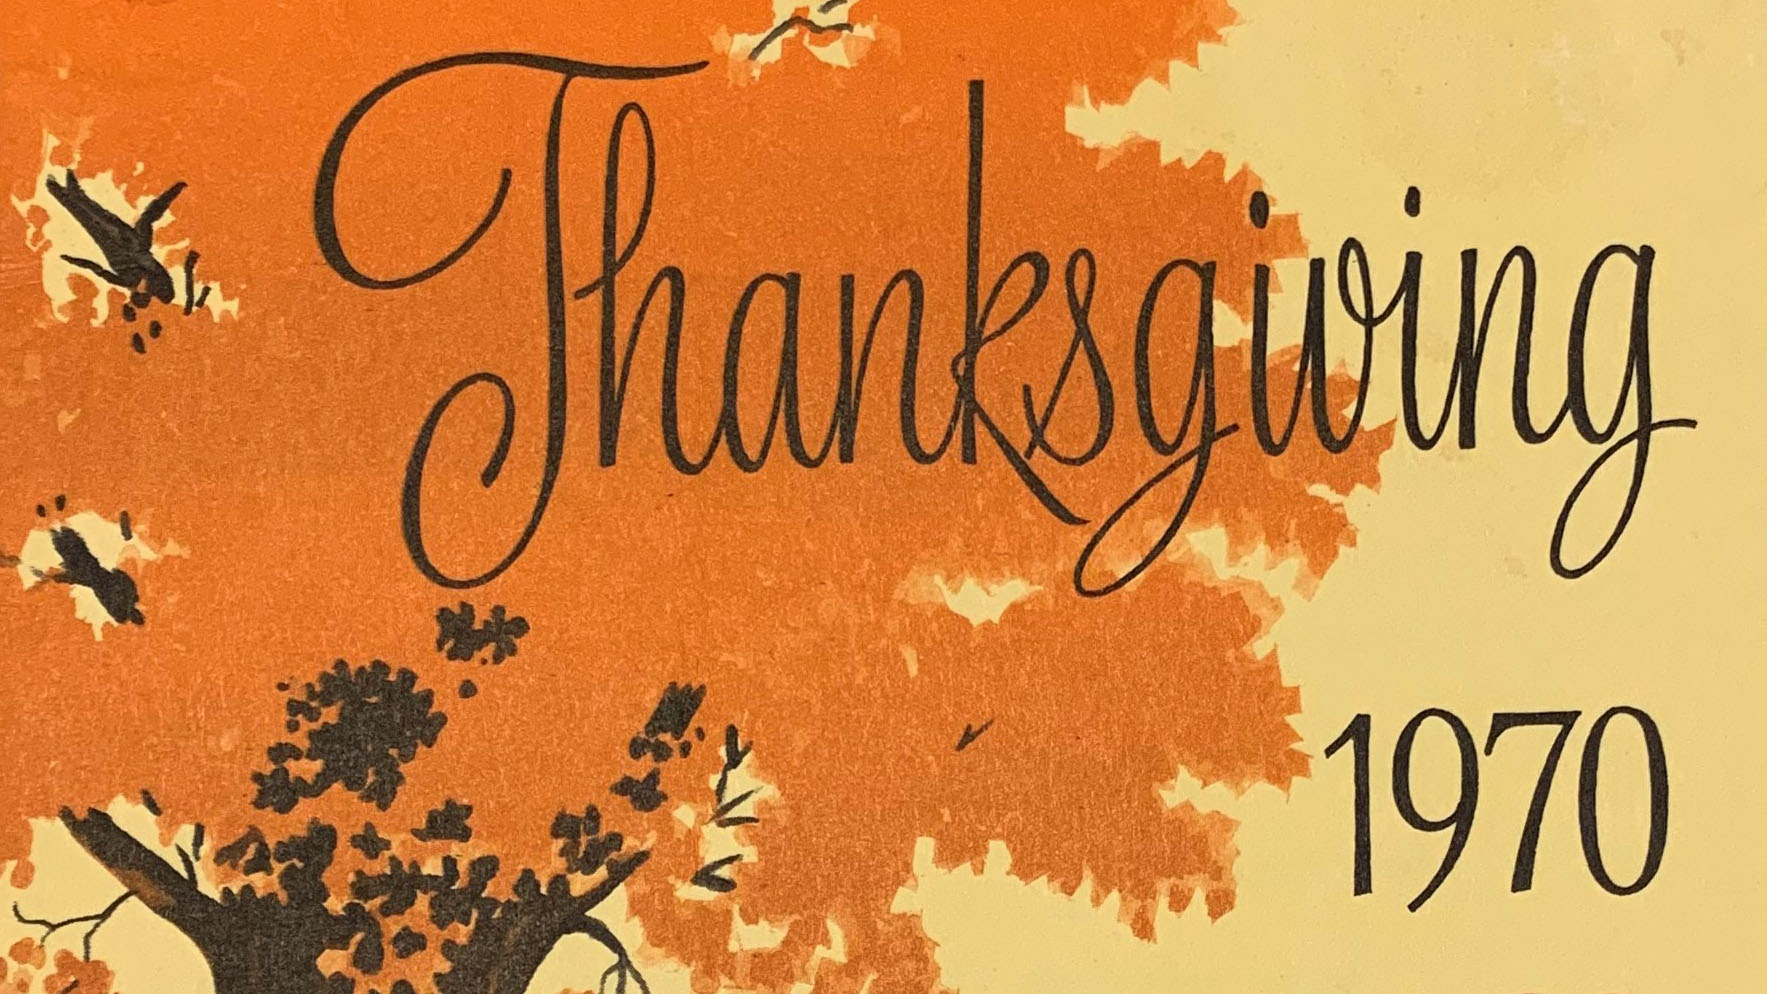 Menu from a 1970 Thanksgiving meal at Dayton. Image of a tree on a orange tinted landscape with pumpkins, brown fence and opaque yellow skyline. (NVAHC)